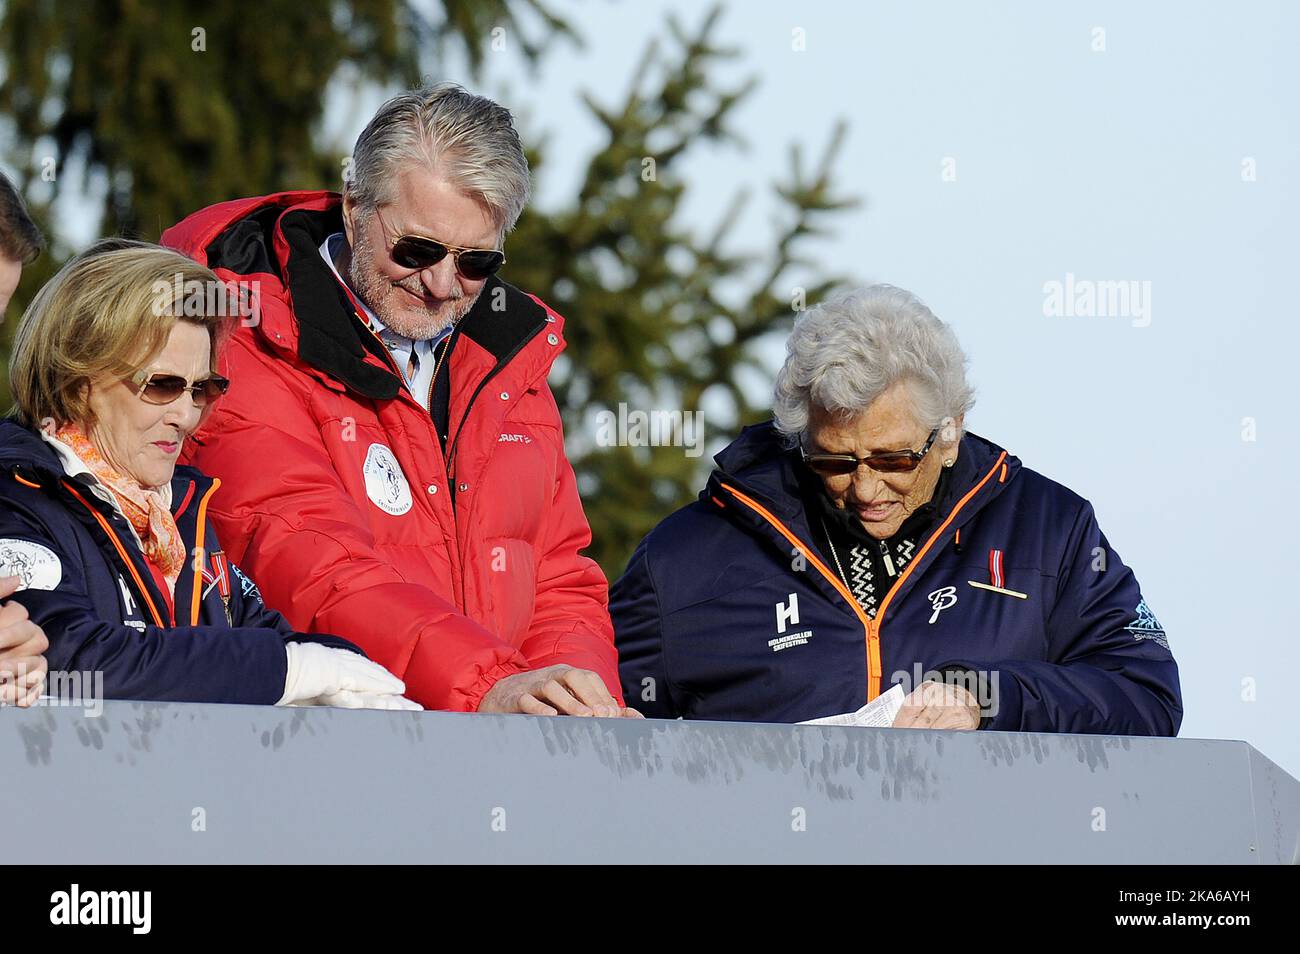 Oslo, Norway, 20150315 The Norwegian Royal Family were present in the Royal box at the Holmenkollen Ski Arena in Oslo Sunday March 15, 2015 for the last World Cup skijump competition of the season. Picture shows Queen Sonja, mayor of Oslo, Fabian Stang, and Princess Astrid. Photo: Jon Olav Nesvold / NTB scanpix  Stock Photo